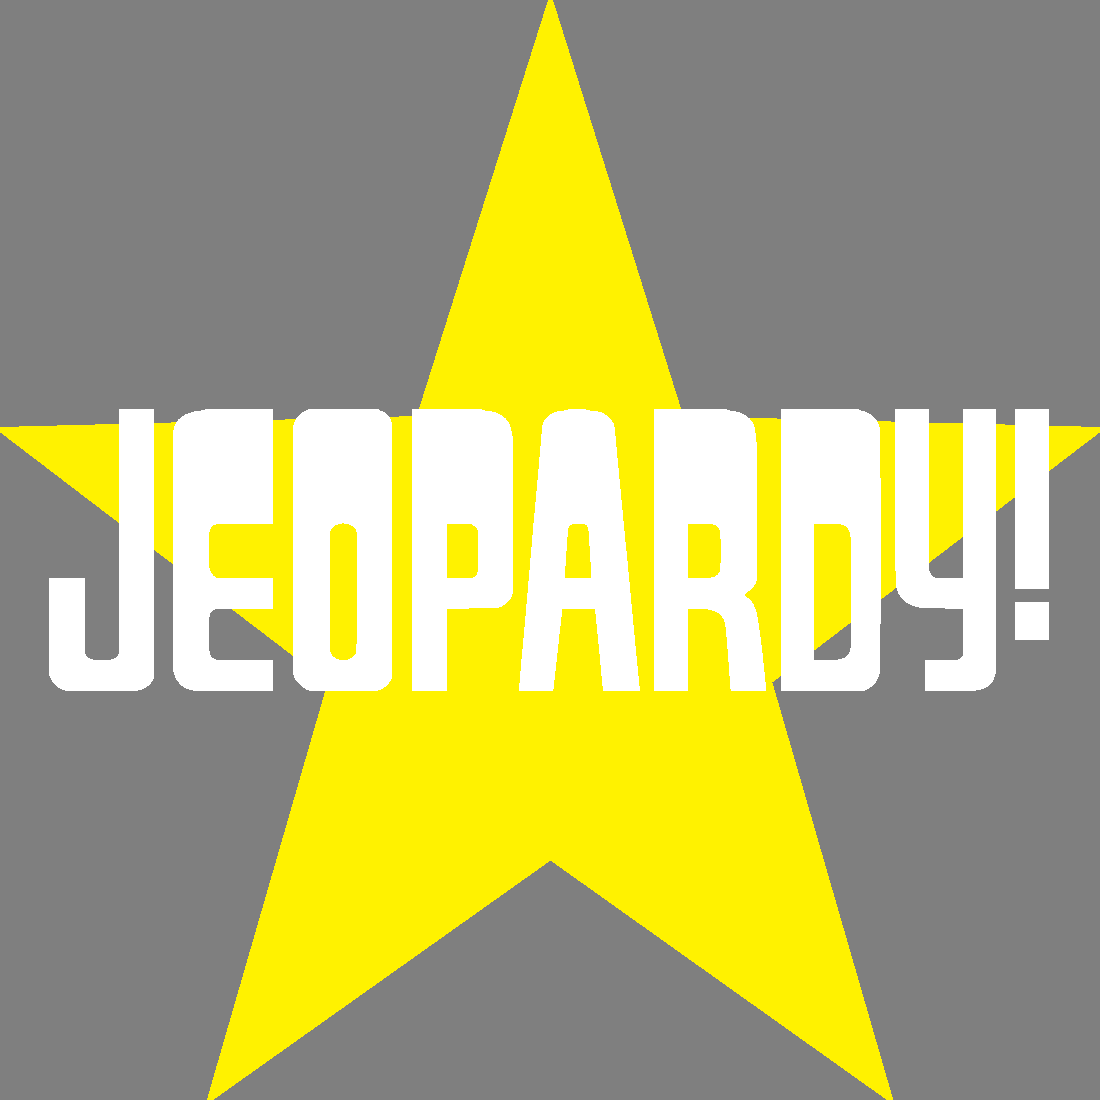 Image - Jeopardy! Logo in Star Background in White Letters.png - Game